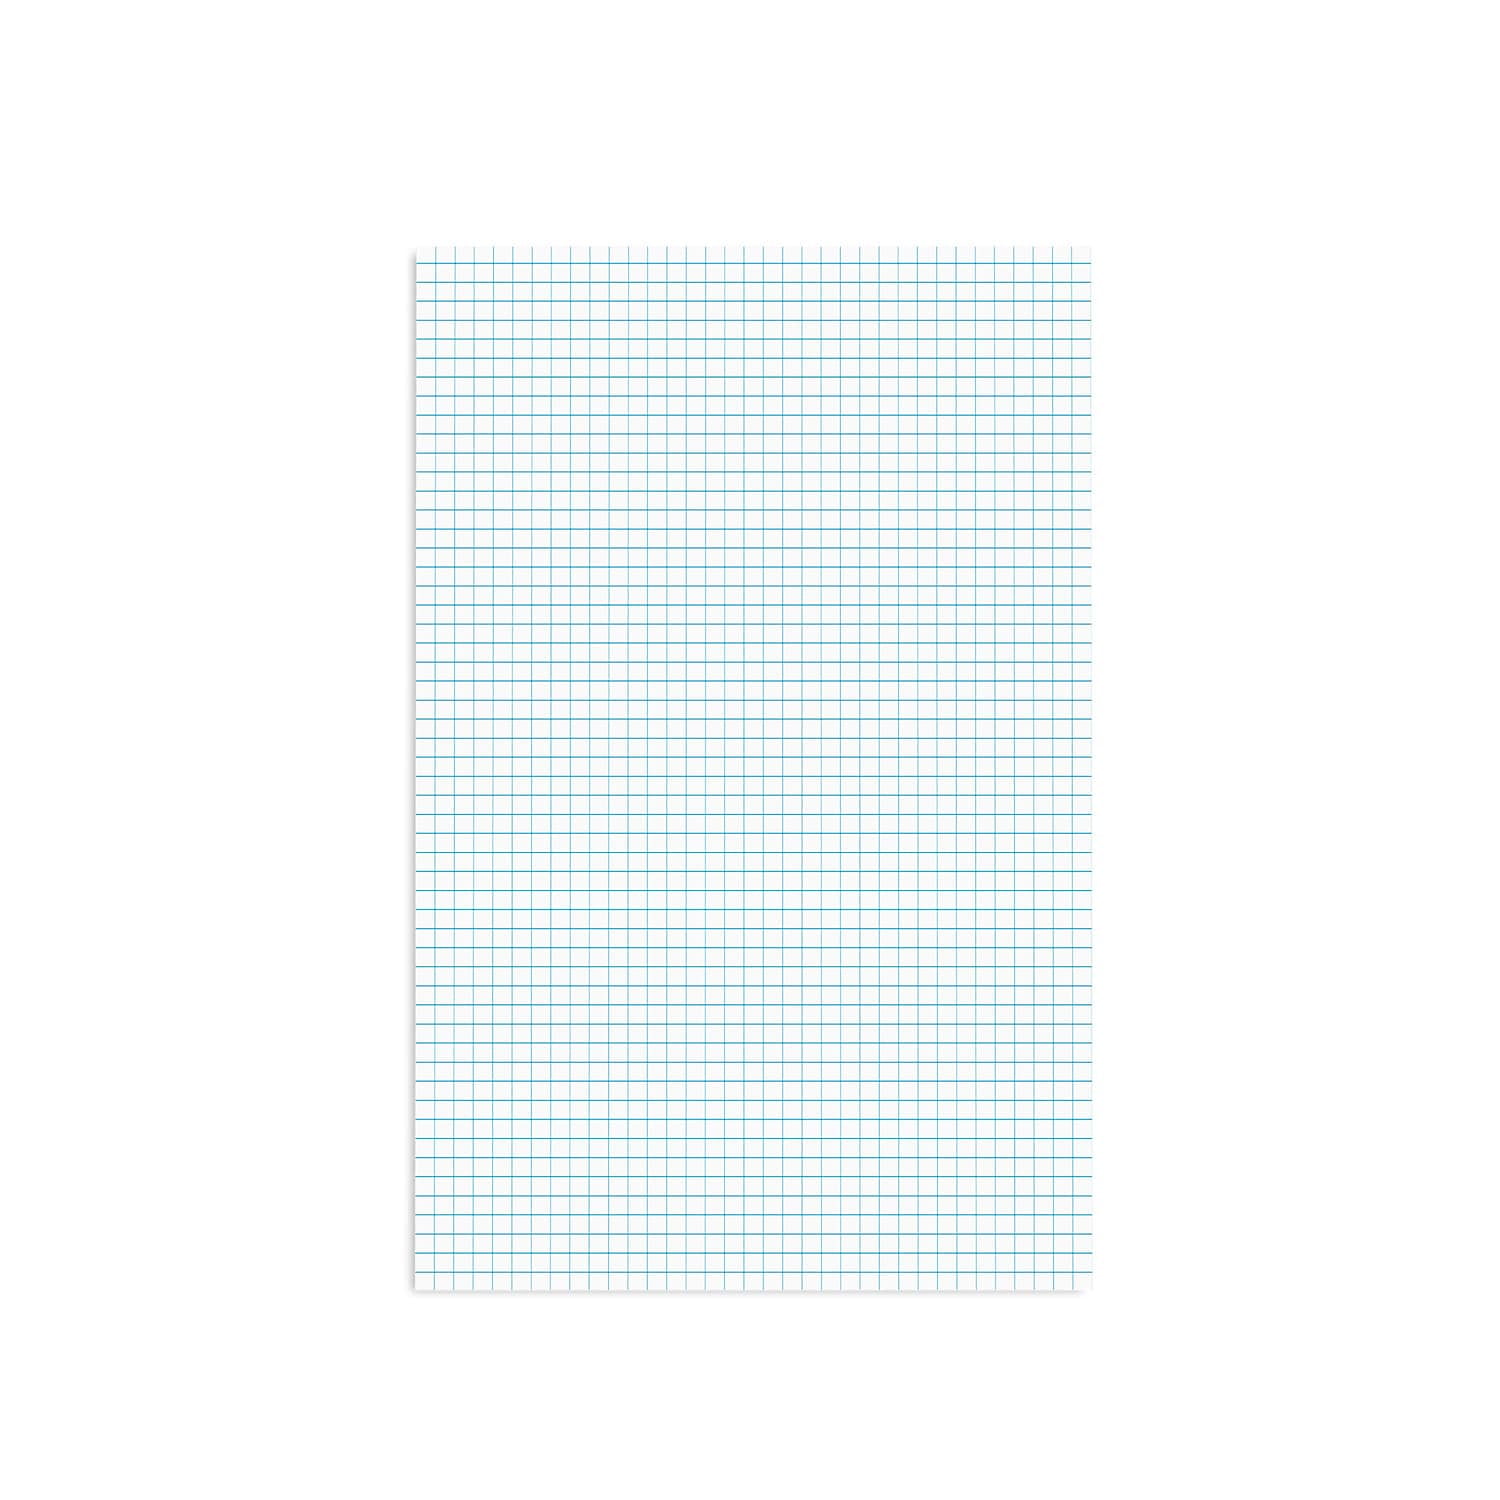 Blueprint Paper: Blueprint Graph Paper For Architecture | 8.5 x 11, 50  Sheets (100 Pages), 4 Squares Per Inch (4 x 4 Grid Ruled) | Architect   And